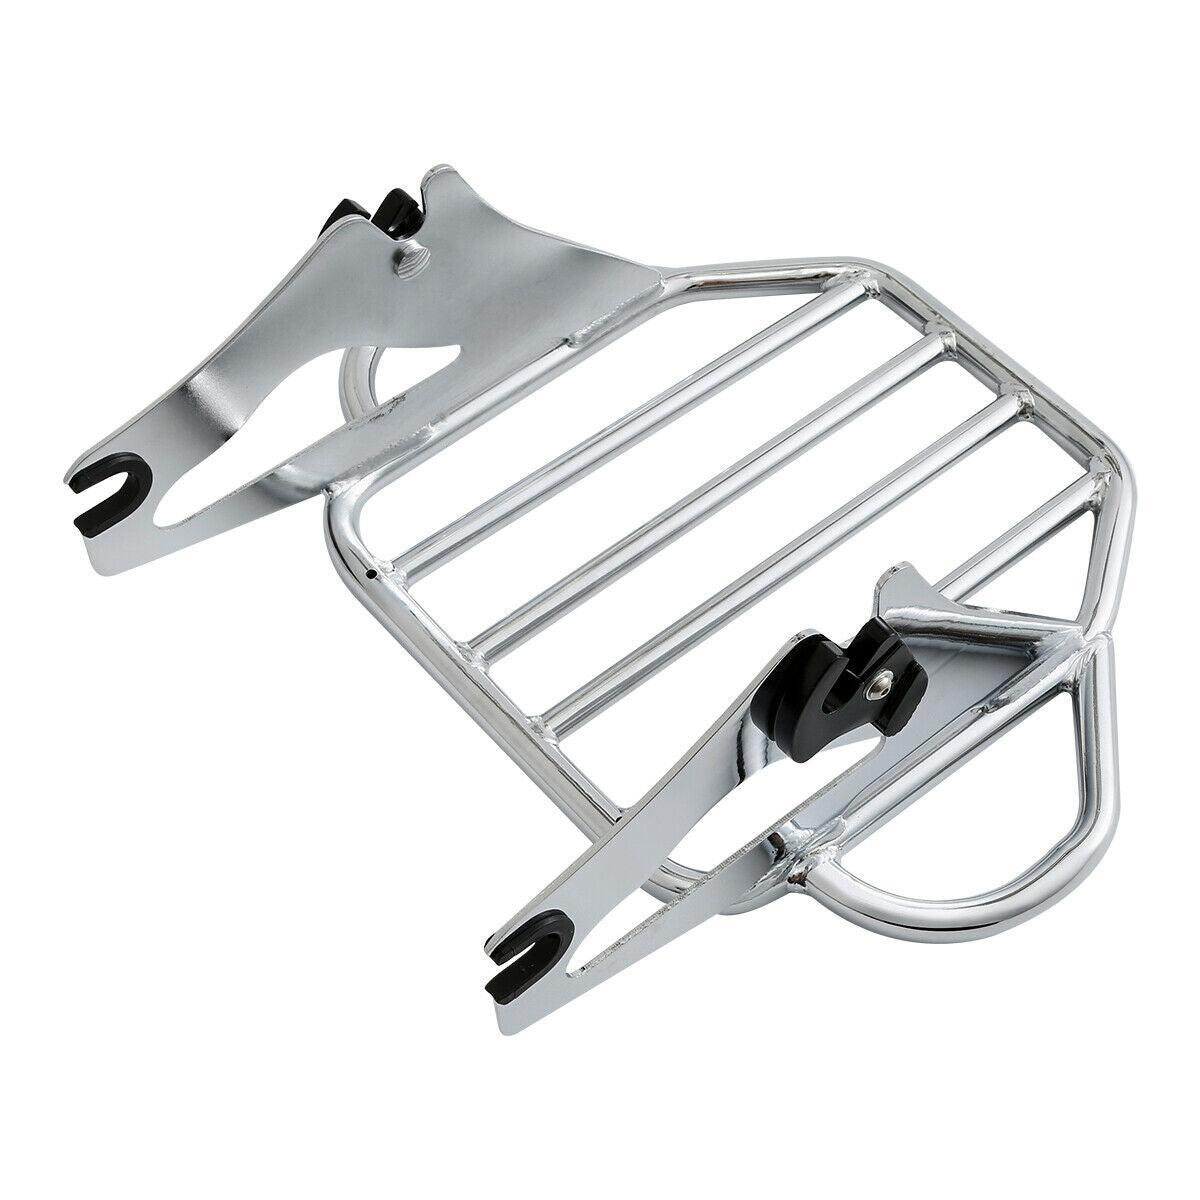 2-Up Mount Luggage Rack For Harley Tour Pak Touring Street Electra Glide 2009-22 - Moto Life Products